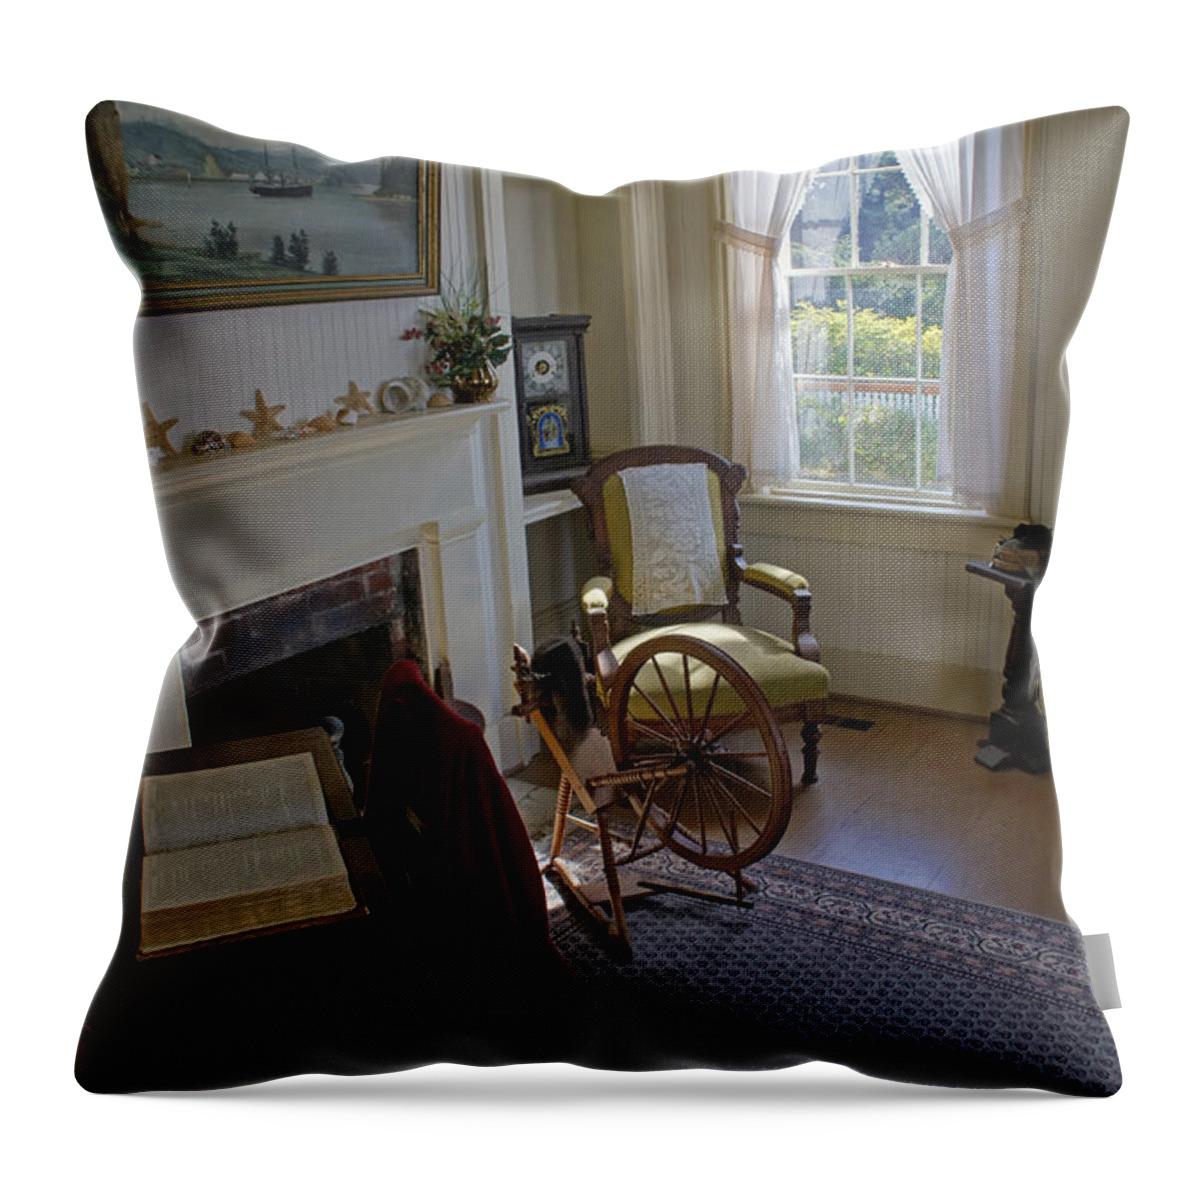 Lighthouse Throw Pillow featuring the photograph Inside Yaquina Bay Lighthouse by Mick Anderson